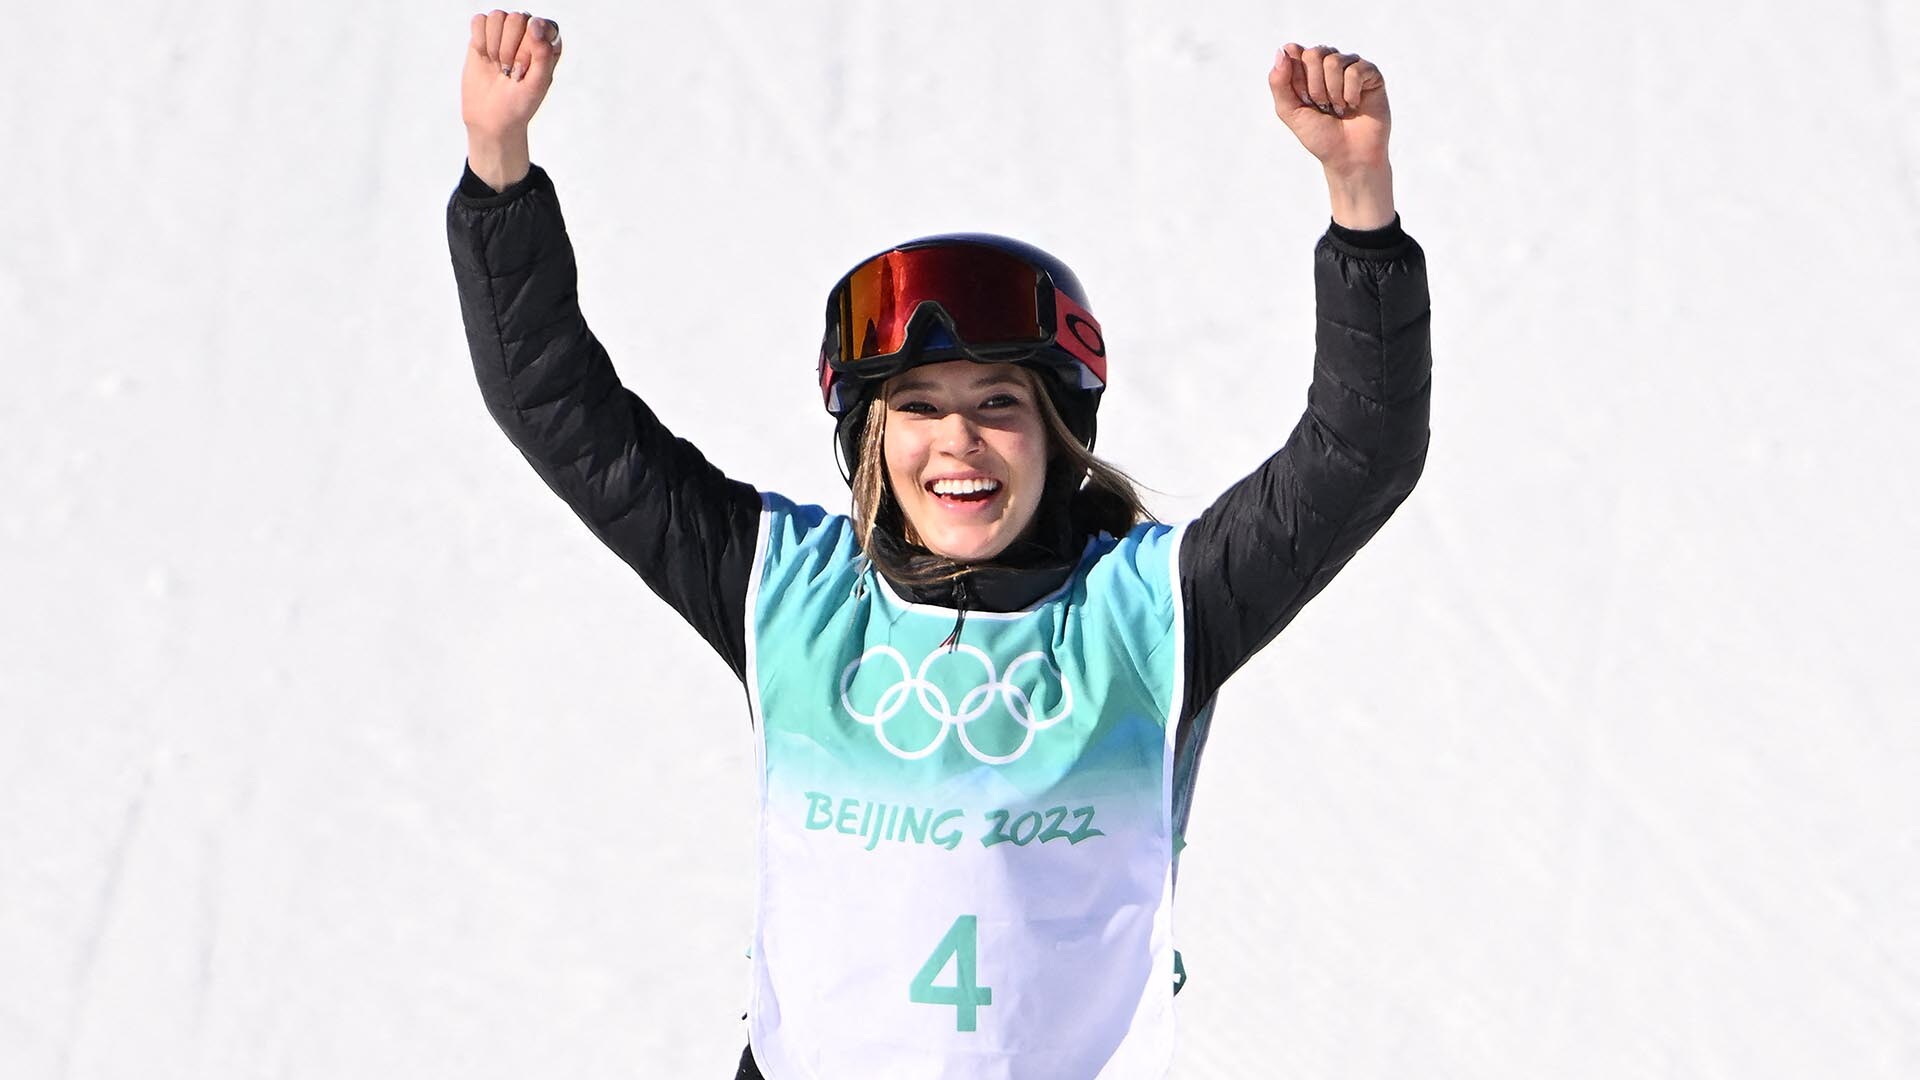 Eileen Gu: Get to know Chinese-American freeskier at Beijing Olympics